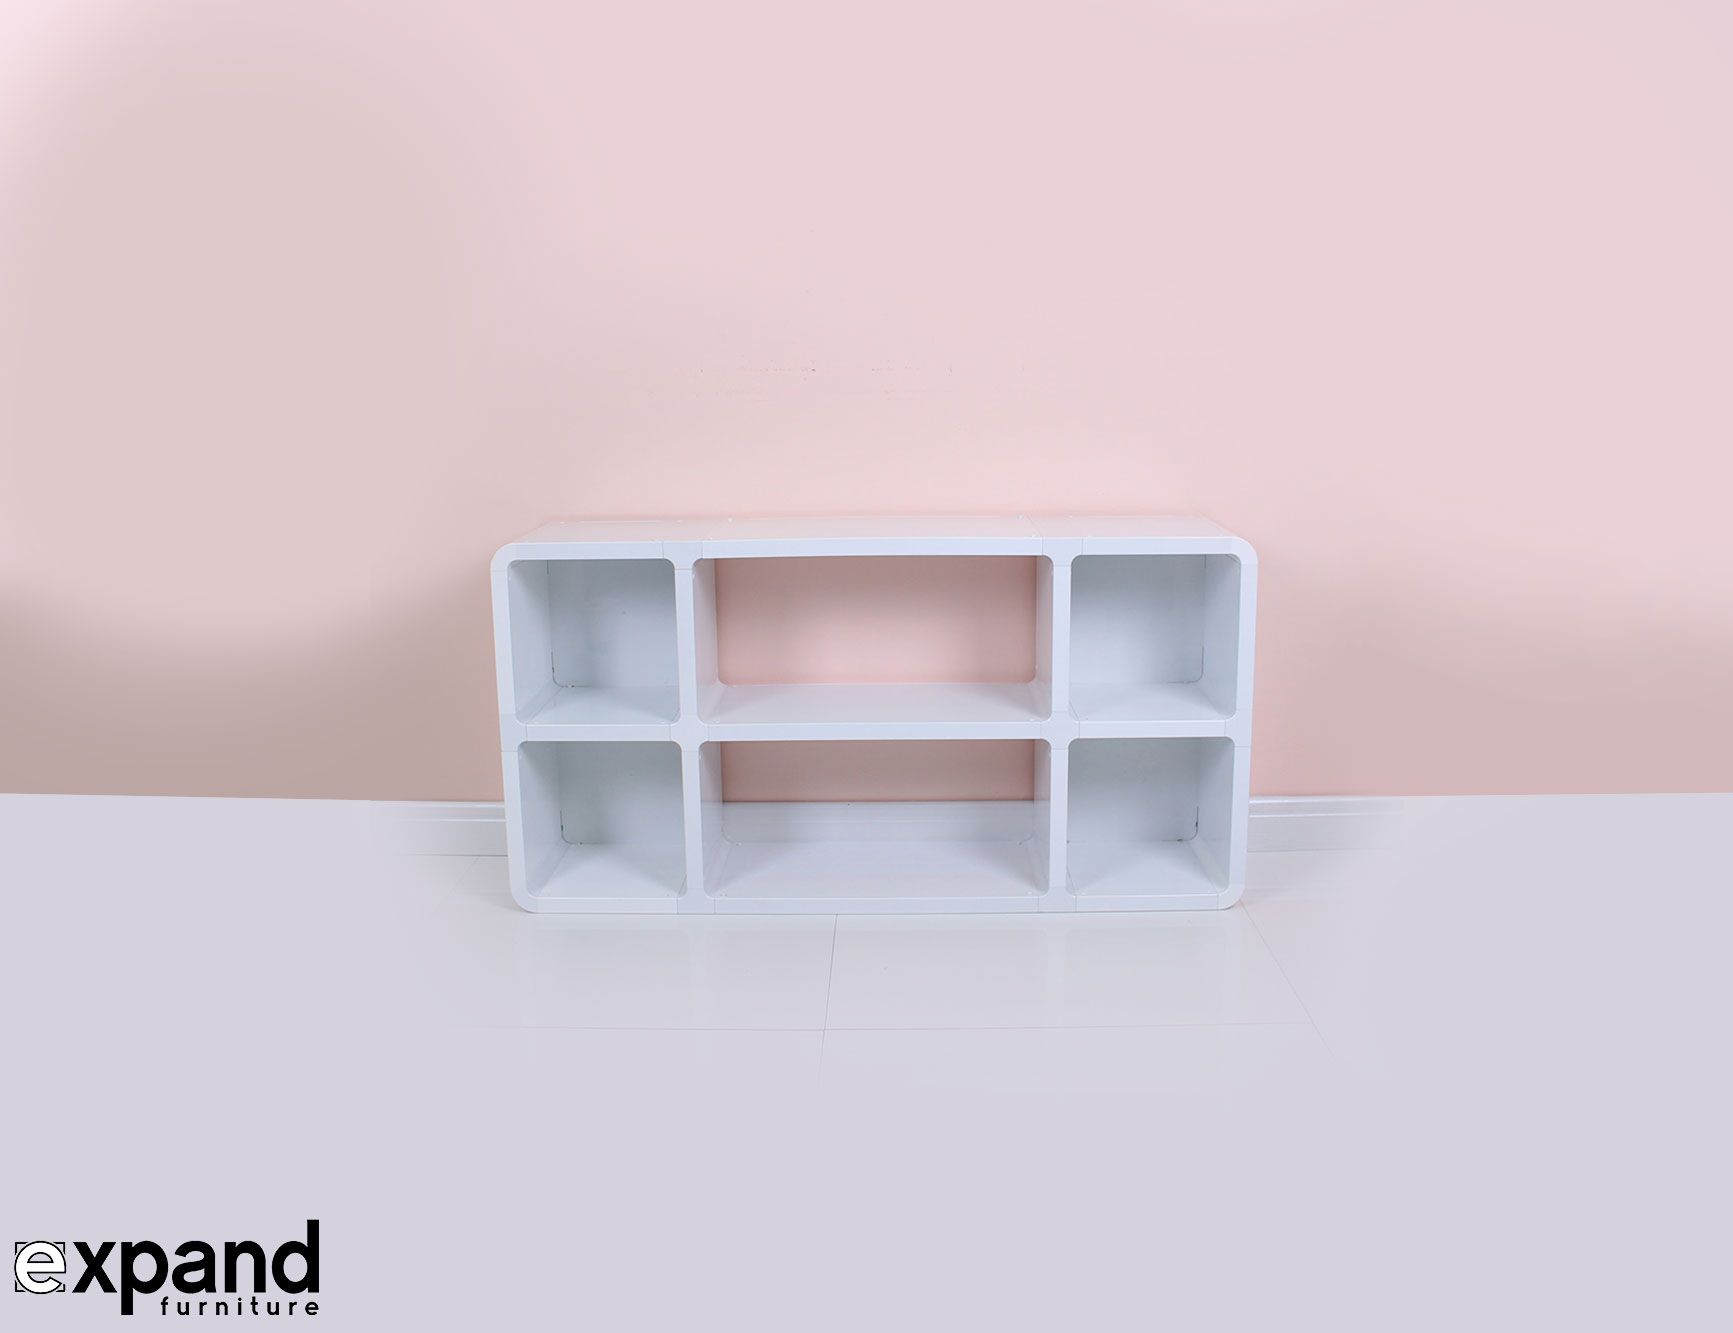 Slim Modern Tv Stand | Expand Furniture Intended For Slim Line Tv Stands (View 11 of 15)